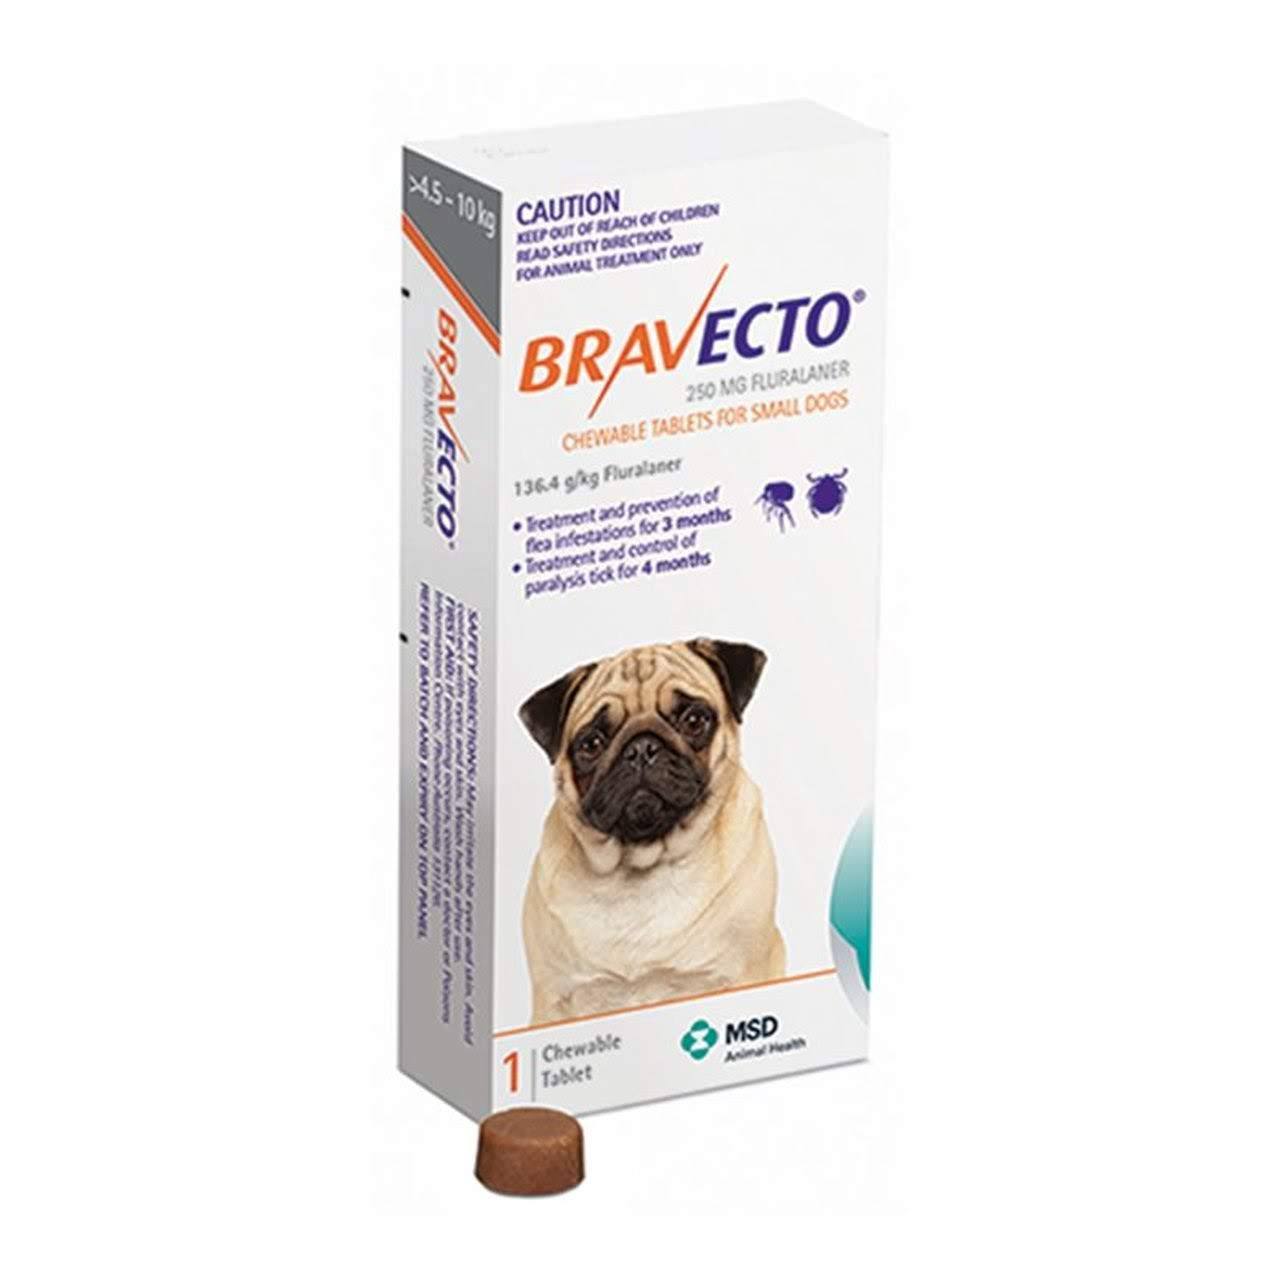 Bravecto Flea And Tick Chew For Dogs Lbs Kg) Yellow Chew Sierra Pet ...